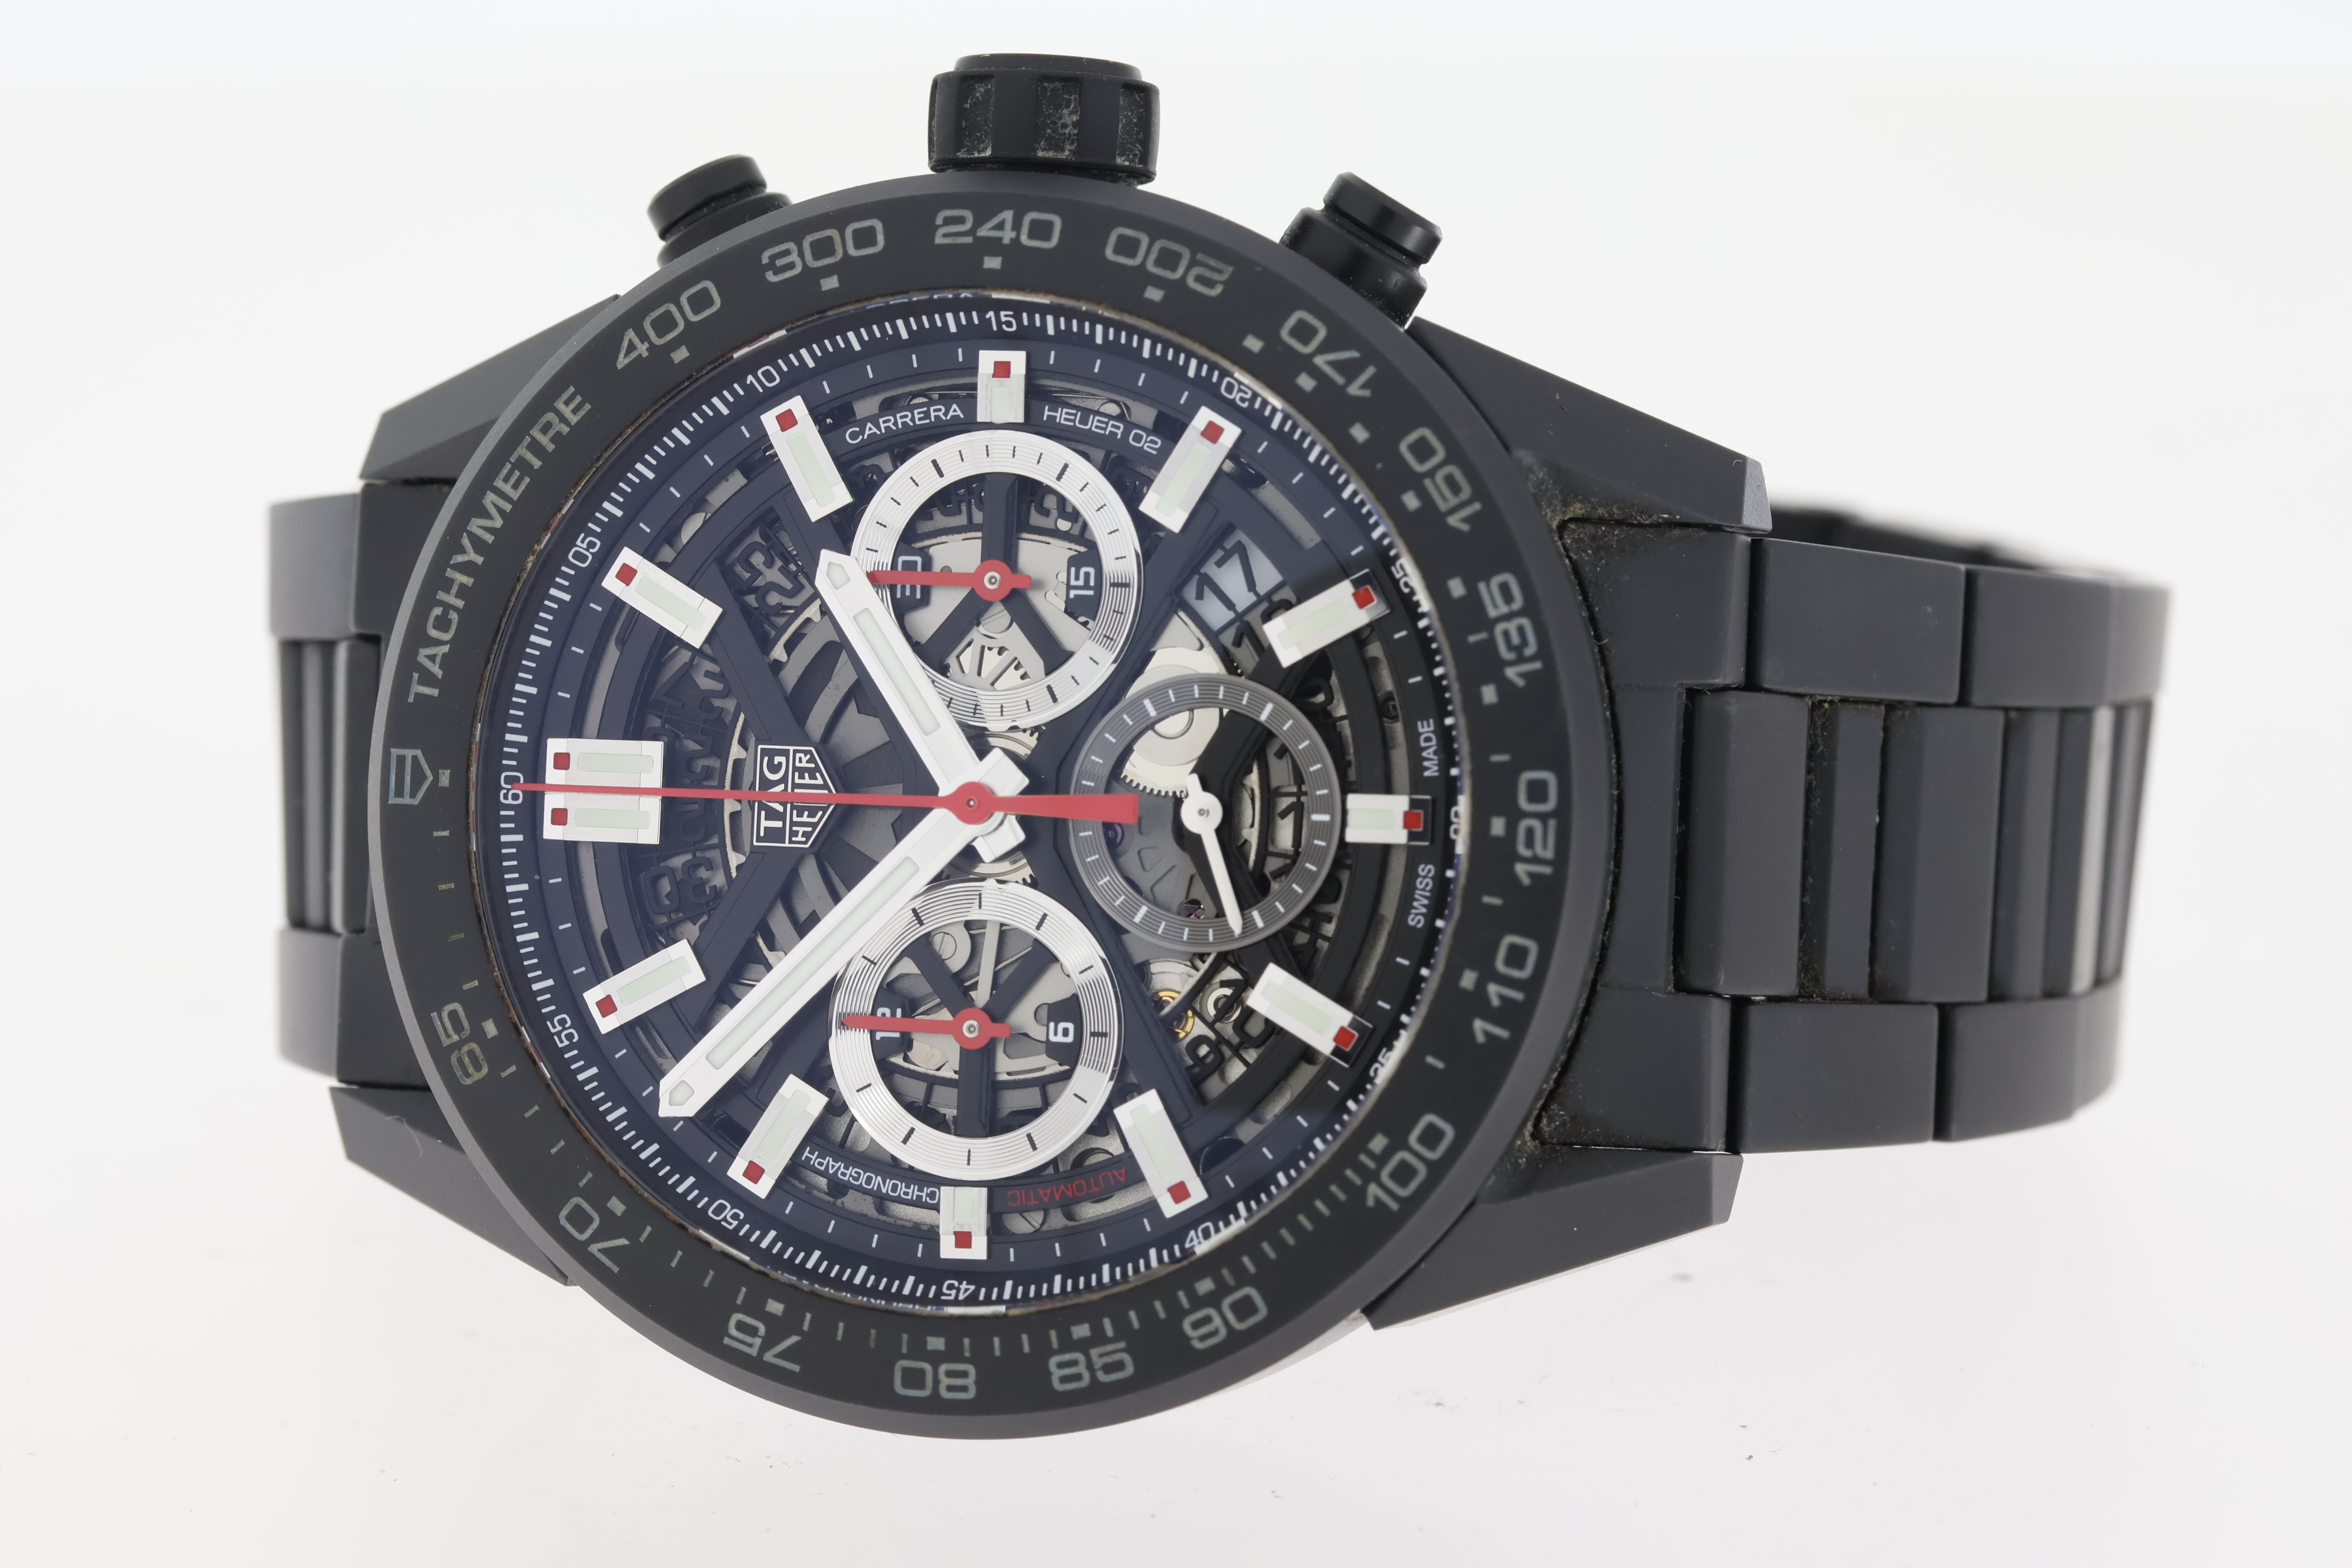 Tag Heuer Carrera Automatic Ceramic Reference CBG2A90-0 - Image 2 of 3